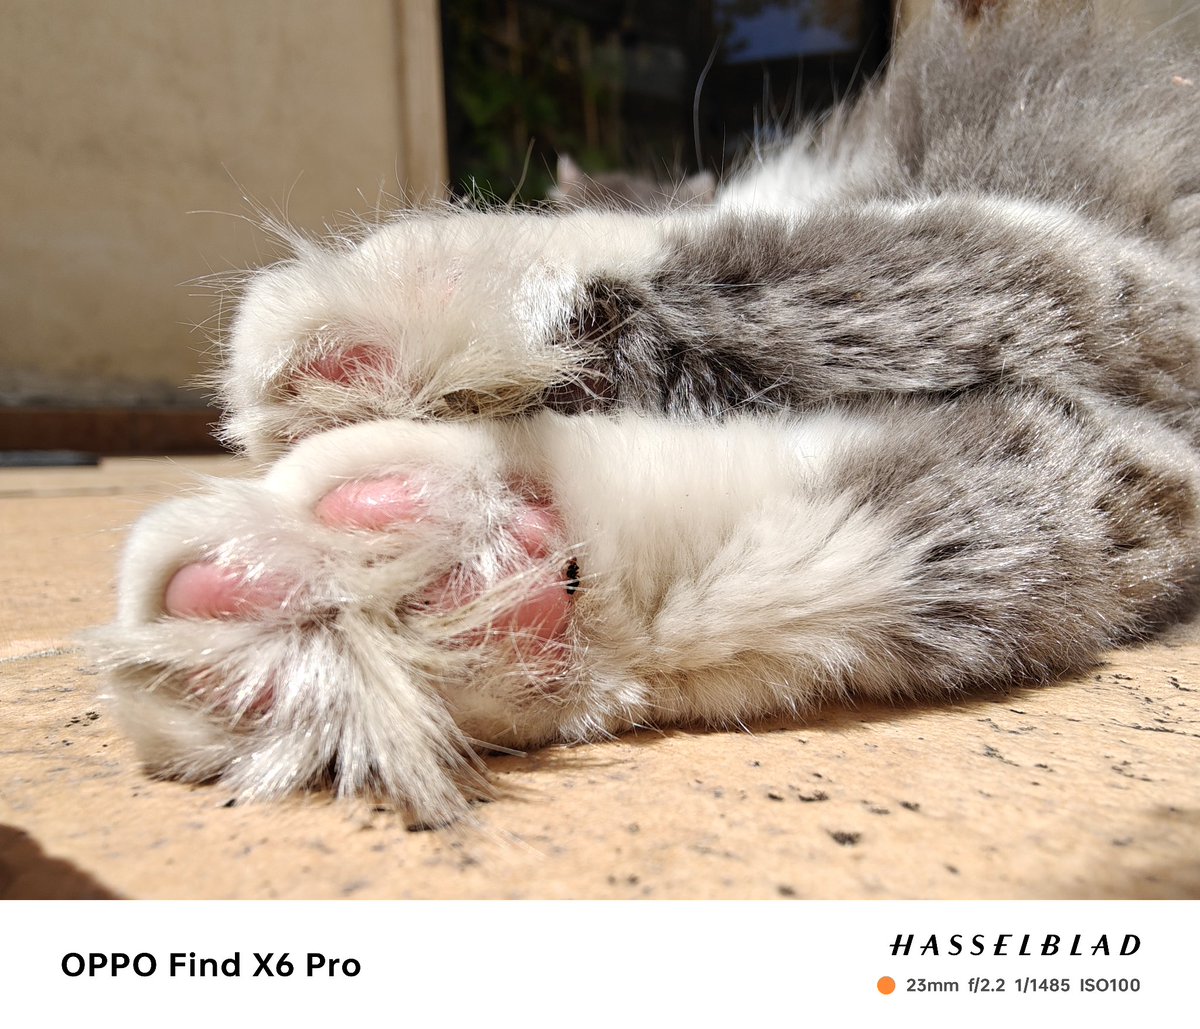 An hard pick for the OPPO Find X6 Pro 🥰

#oppo #oppofindx6pro #jack #cats #weekend #ShotOnOppo #ShotOnSnapdragon